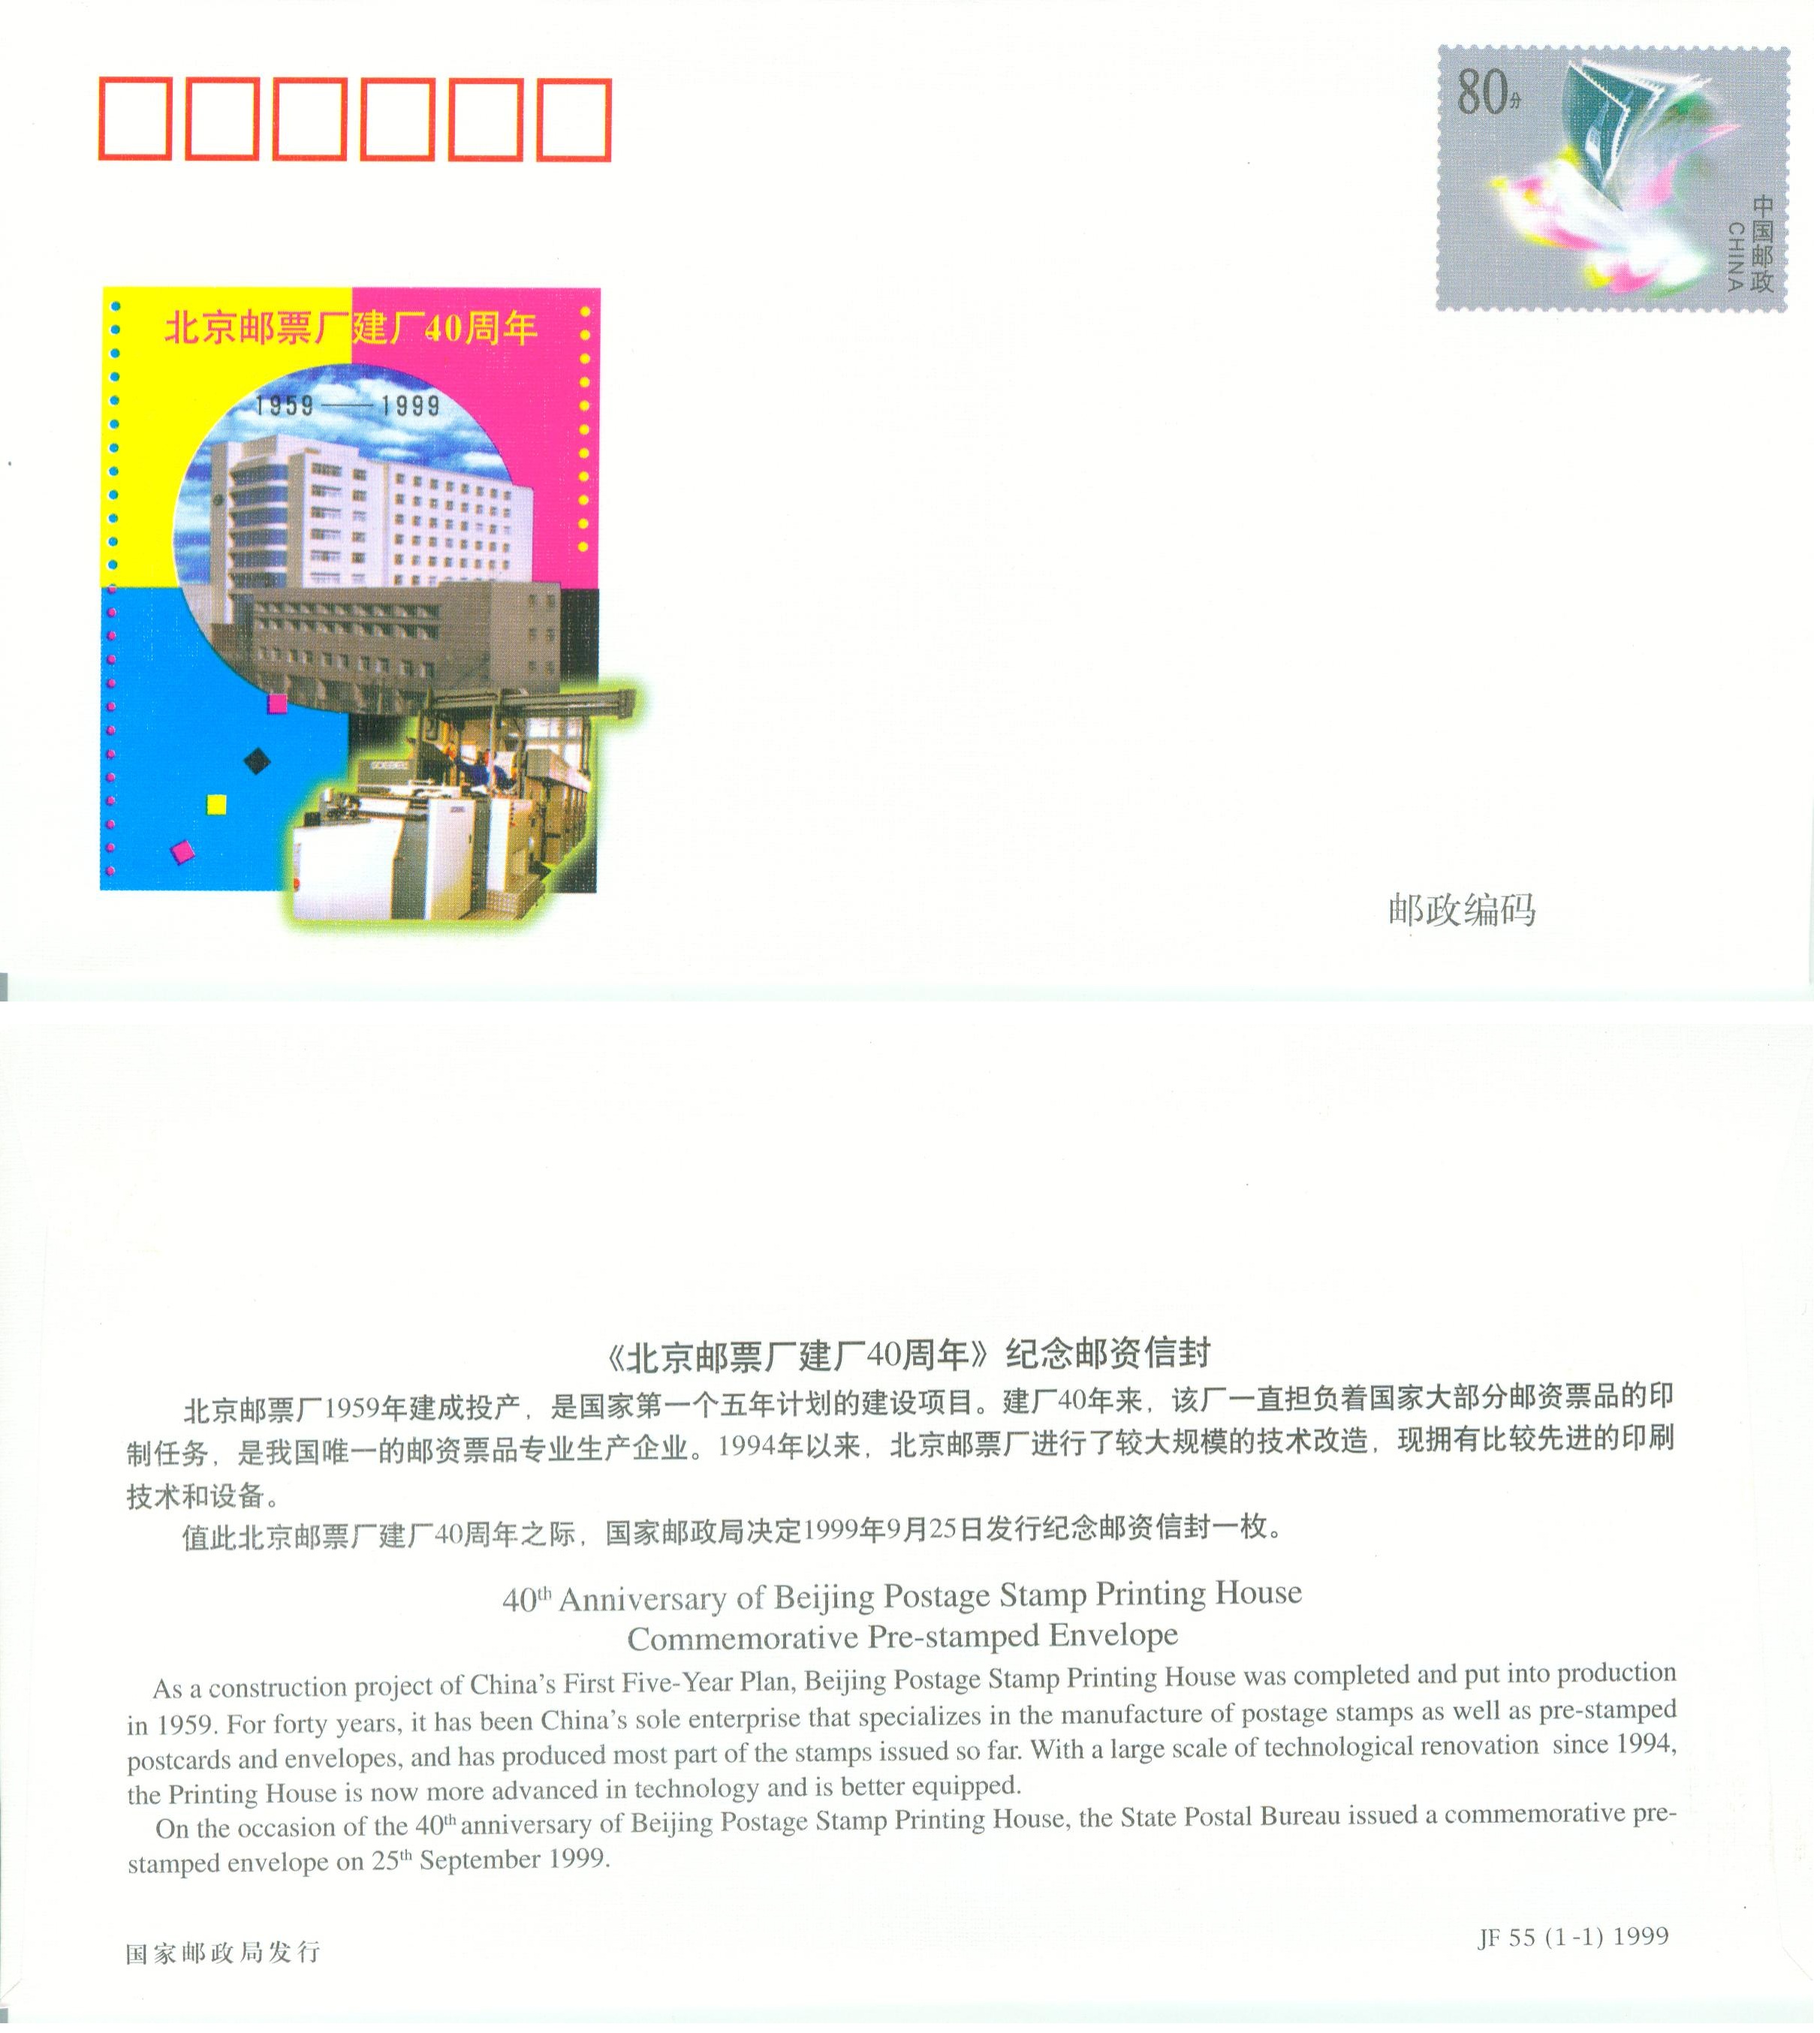 JF55, 40th Anniversary of Beijing Postage Stamp Printing House, 1999